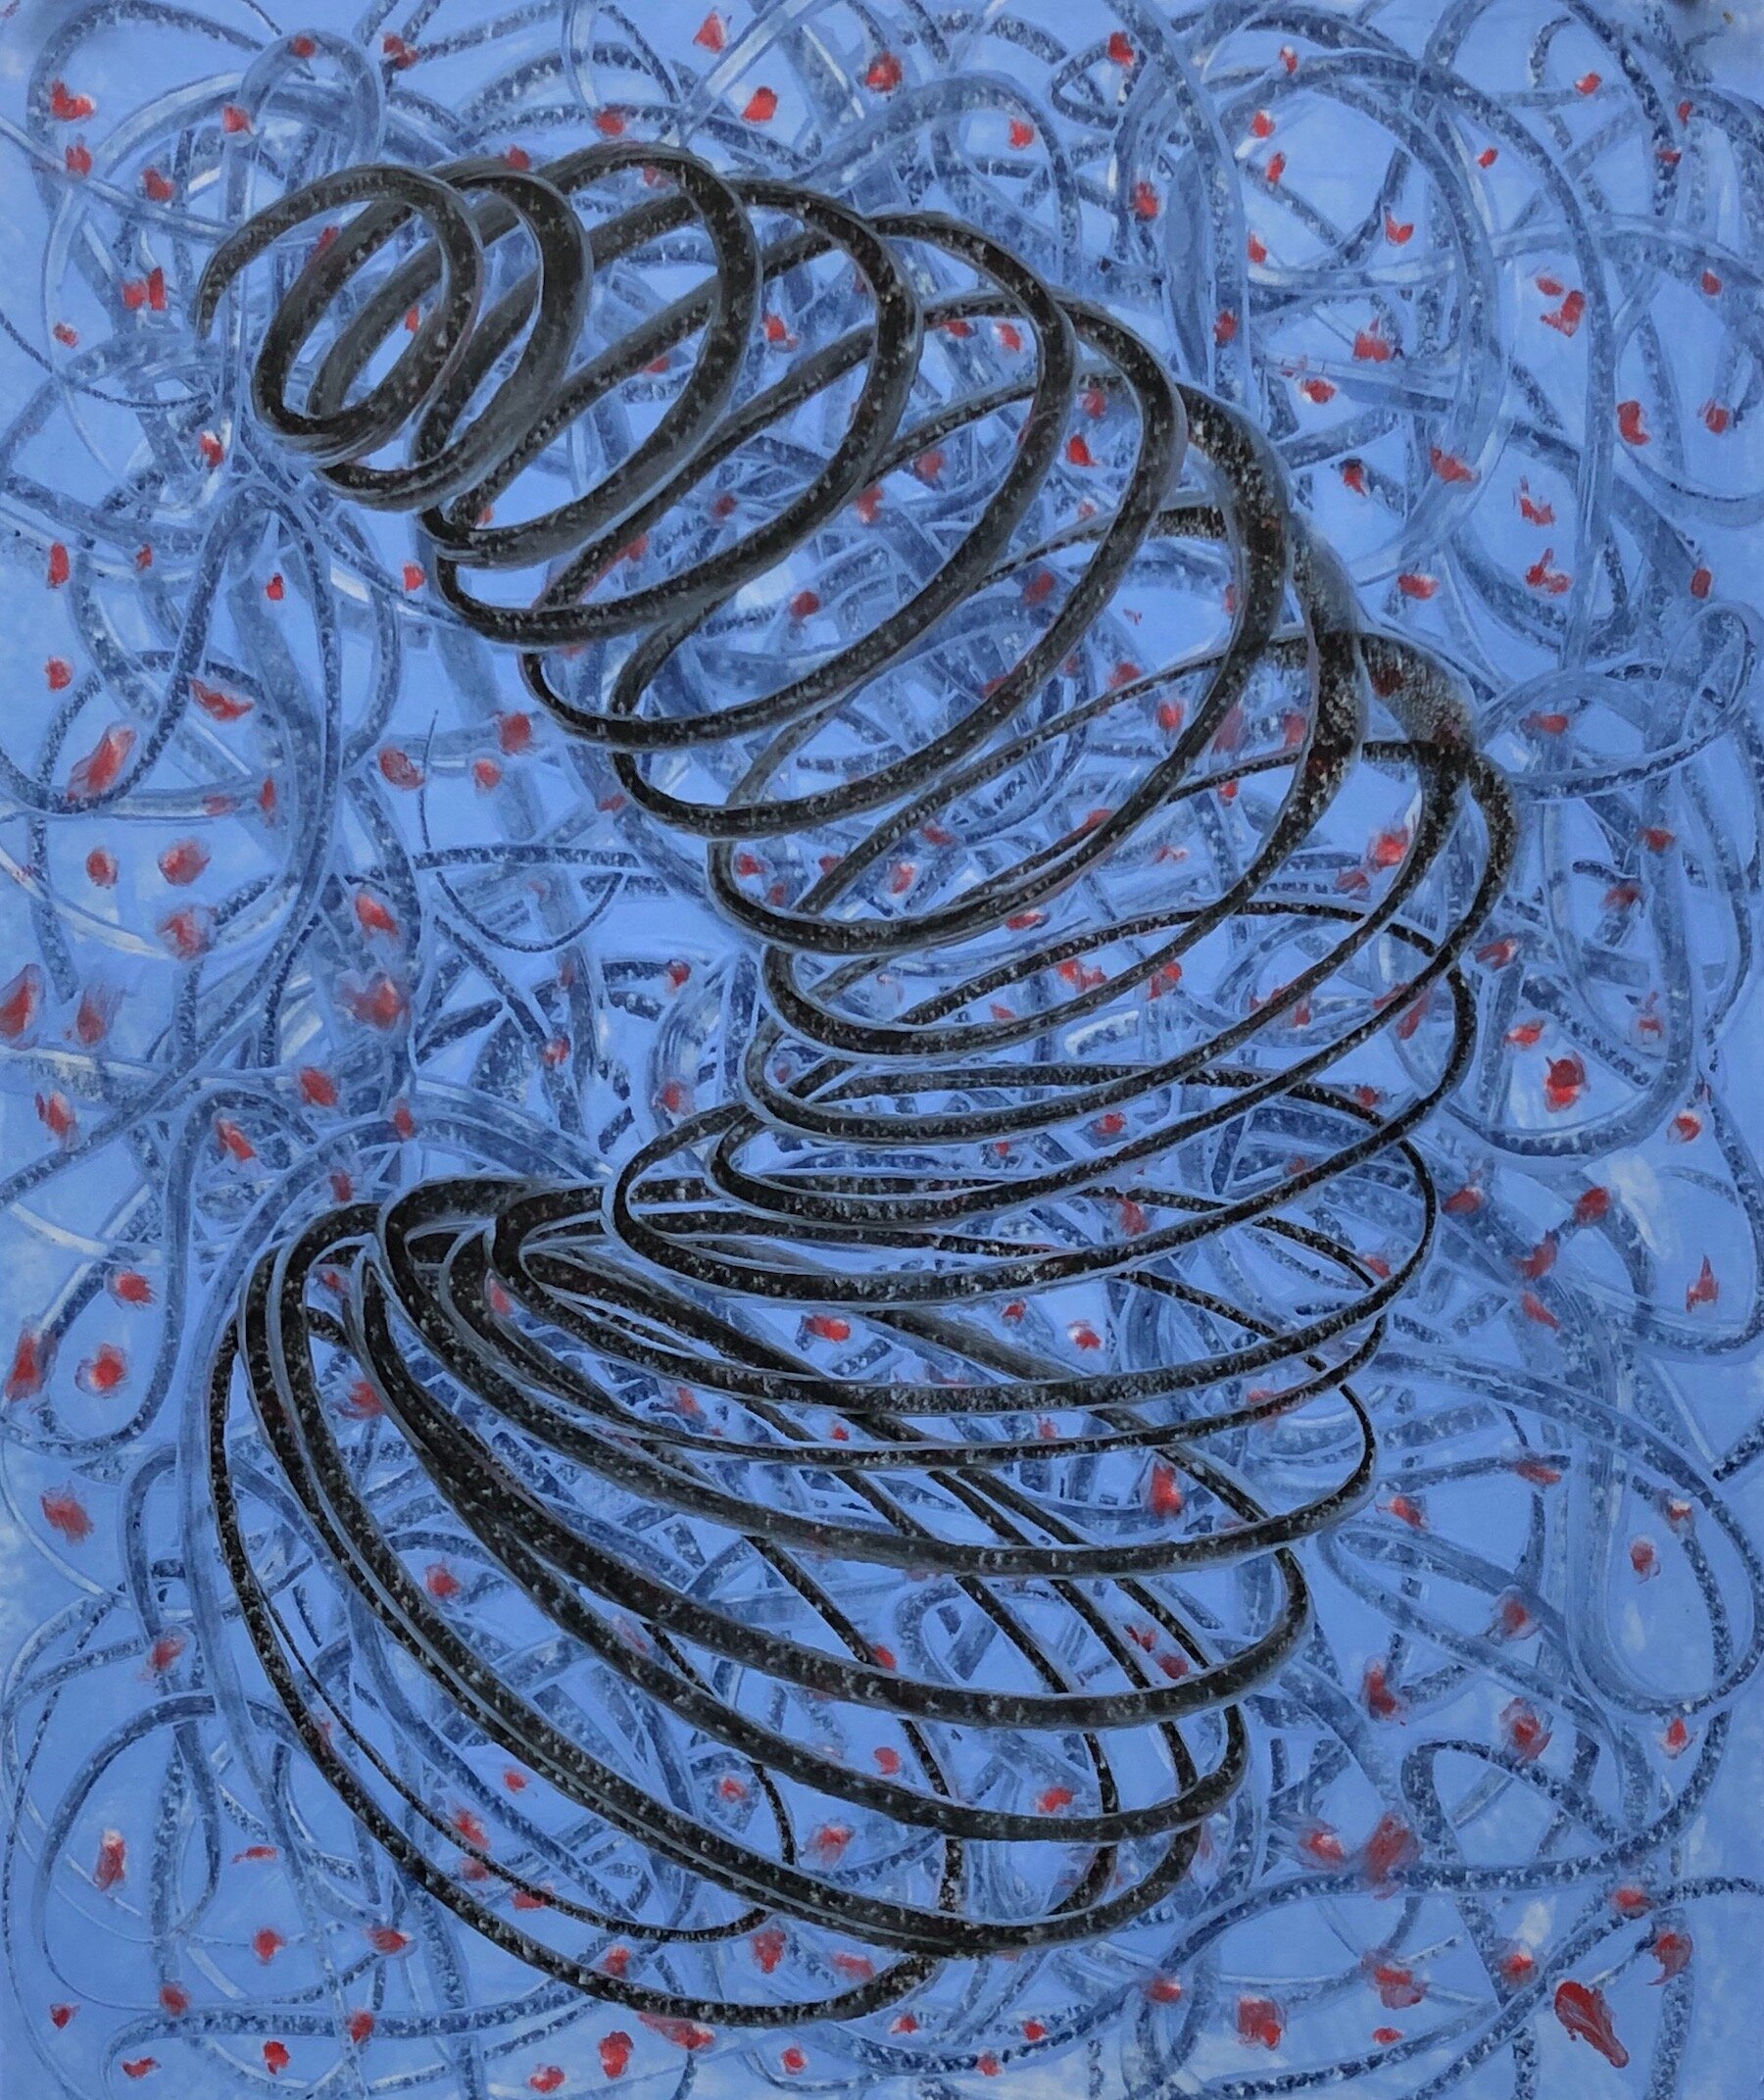  Kay Hartung,  “Vortex 1”   Encaustic on paper, 16.75 x 20.5 inches 